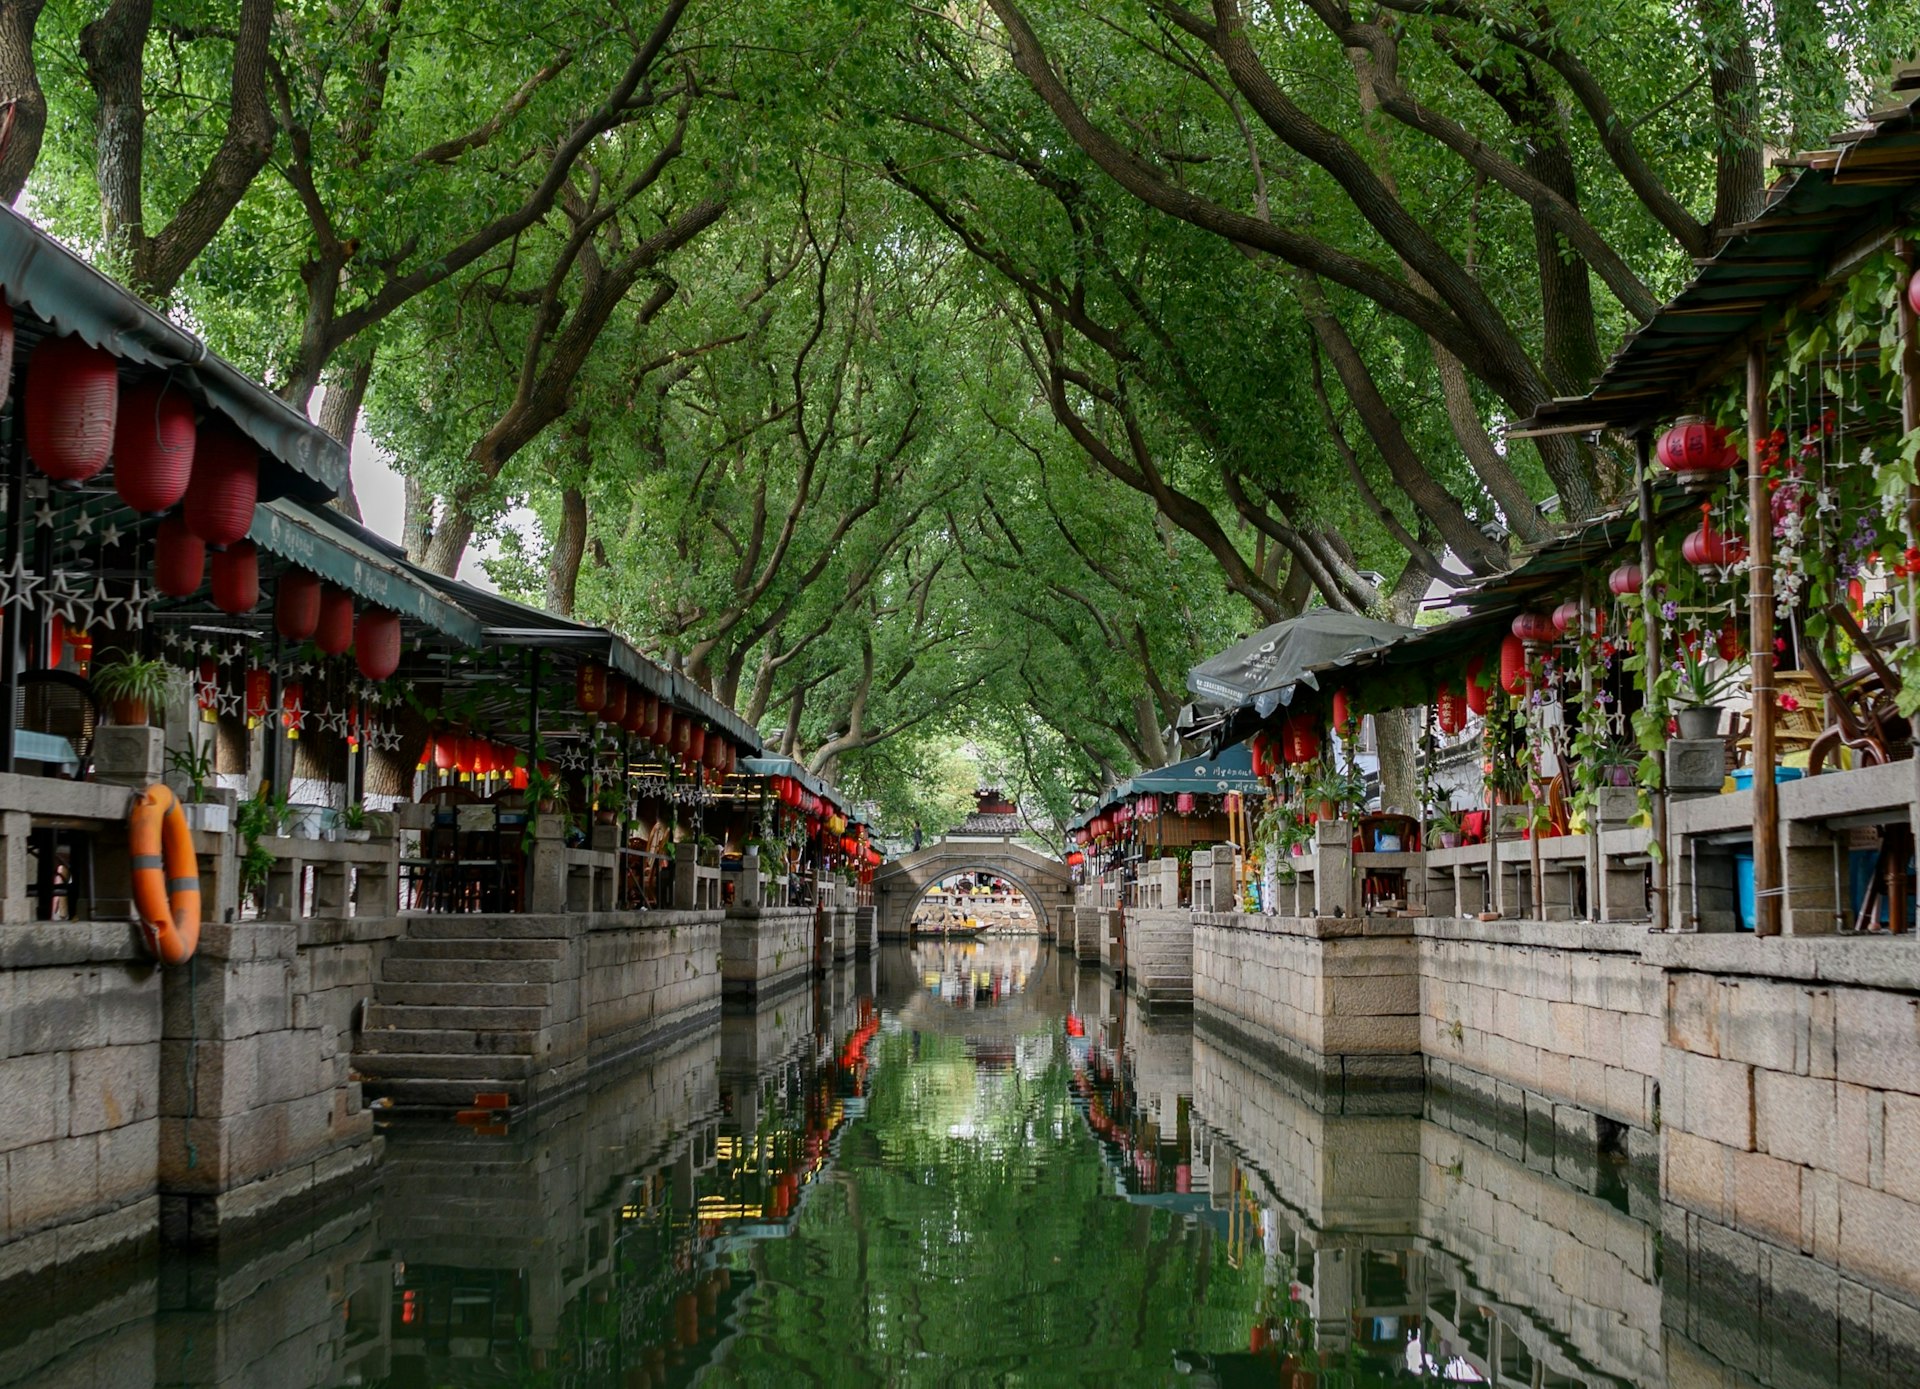 A view of a Suzhou canal, taken from the water at water level. The canal is lined on either side by small businesses, with the straight and narrow canal running under an ornate stone bridge in the distance.